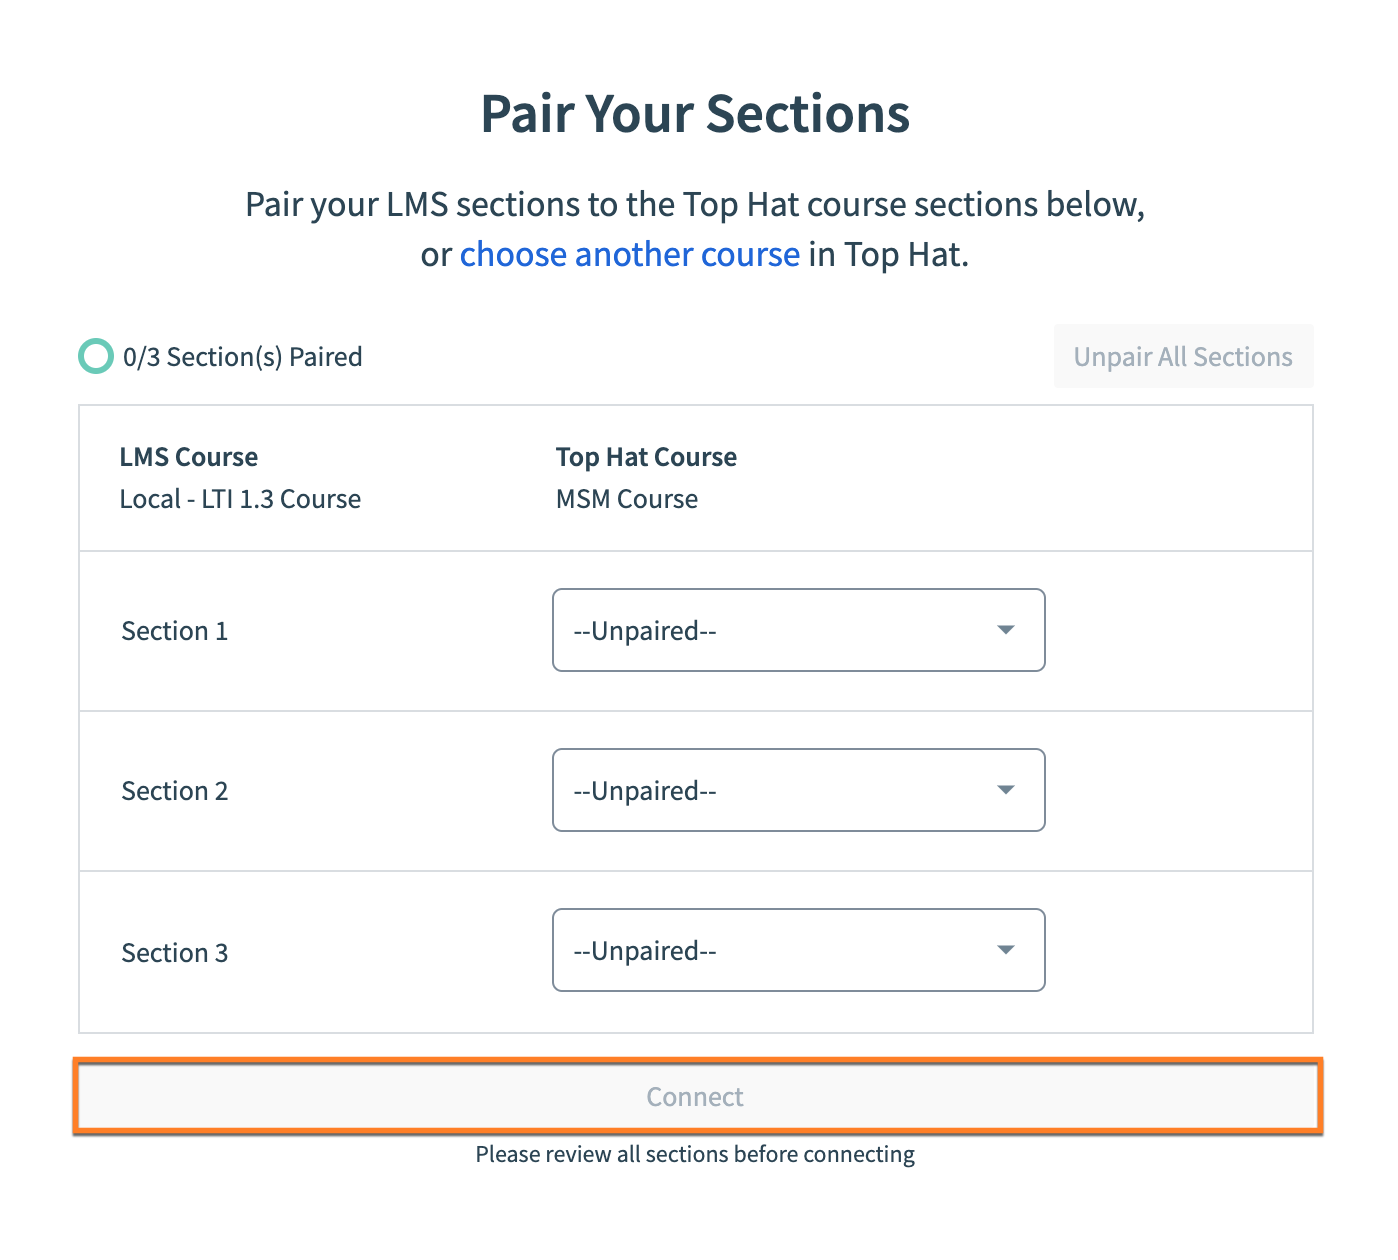 Pair Your Sections page is shown with Connect highlighted